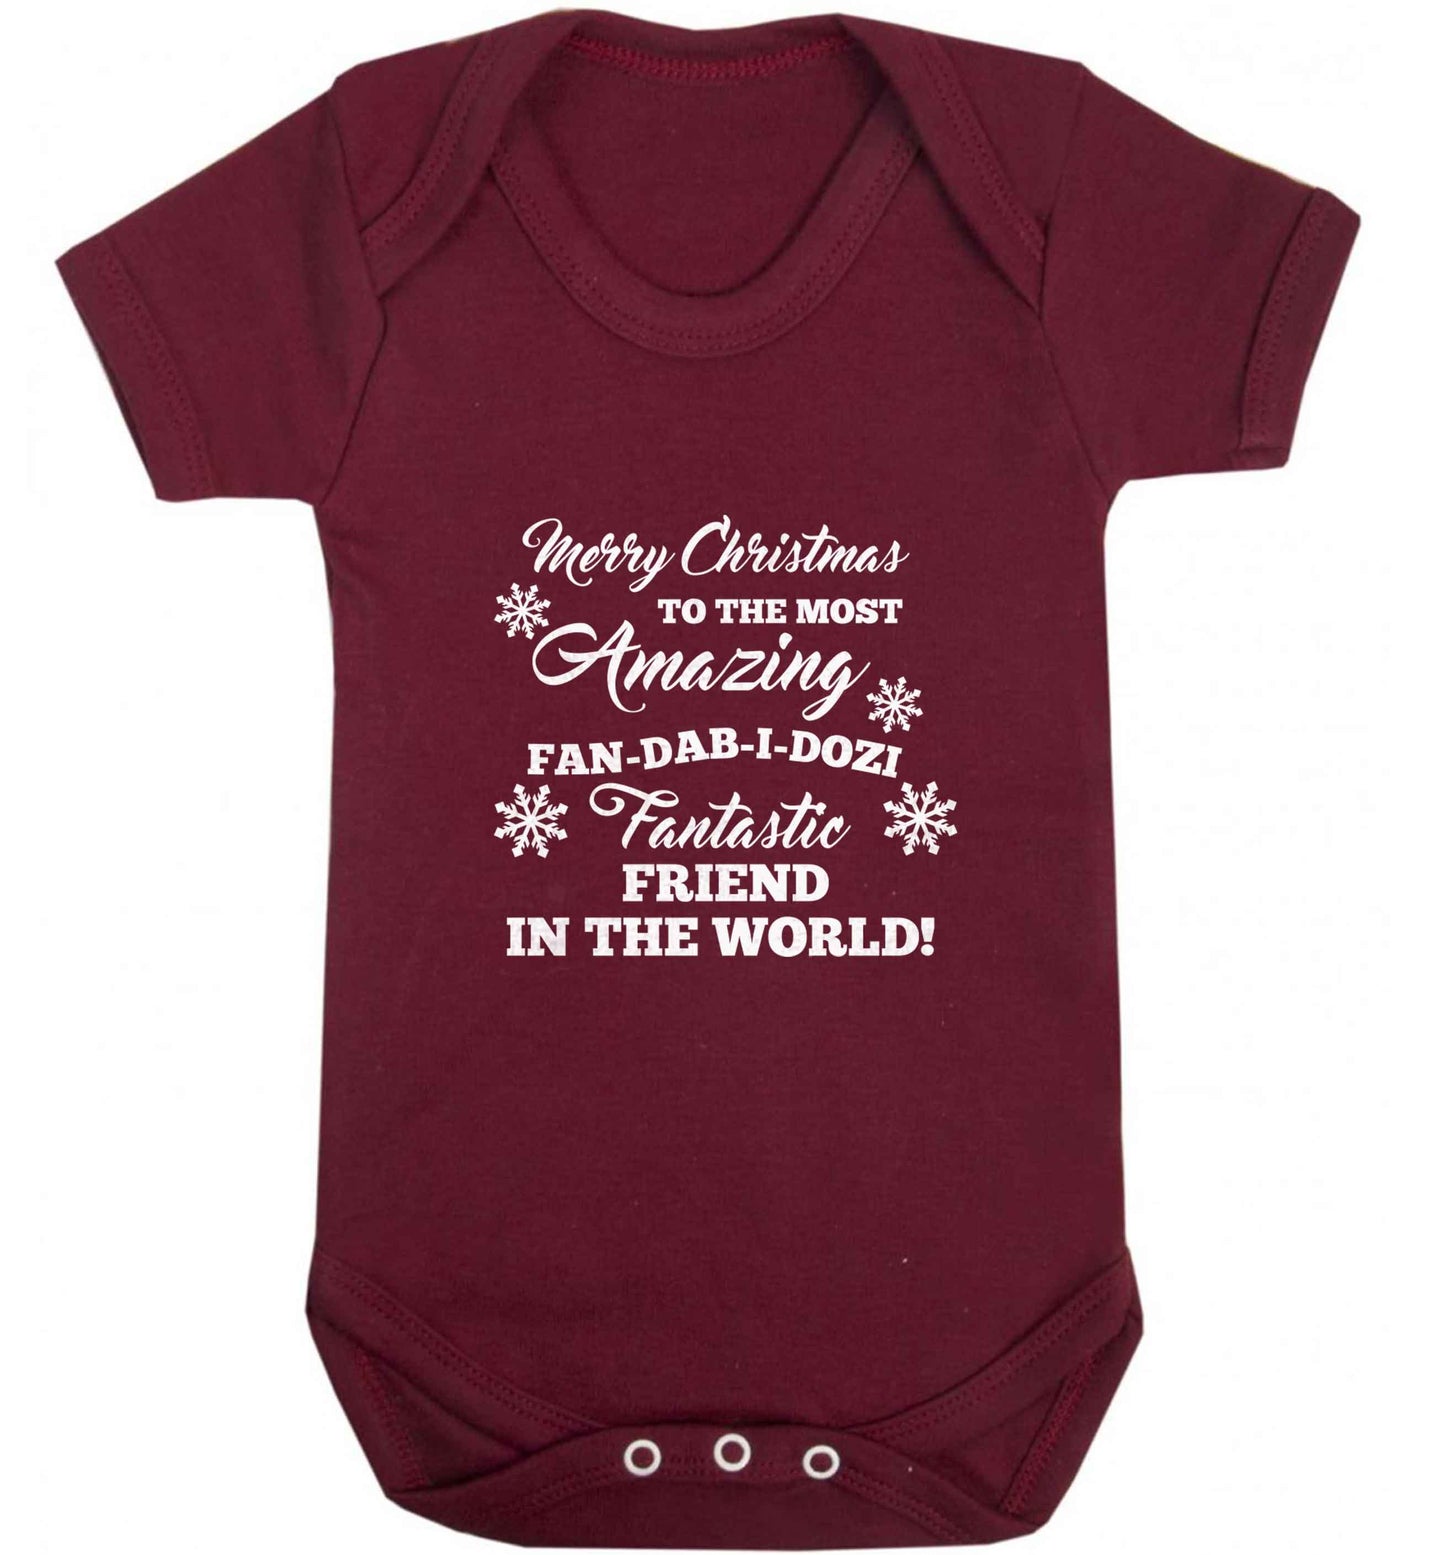 Merry Christmas to the most amazing fan-dab-i-dozi fantasic friend in the world baby vest maroon 18-24 months